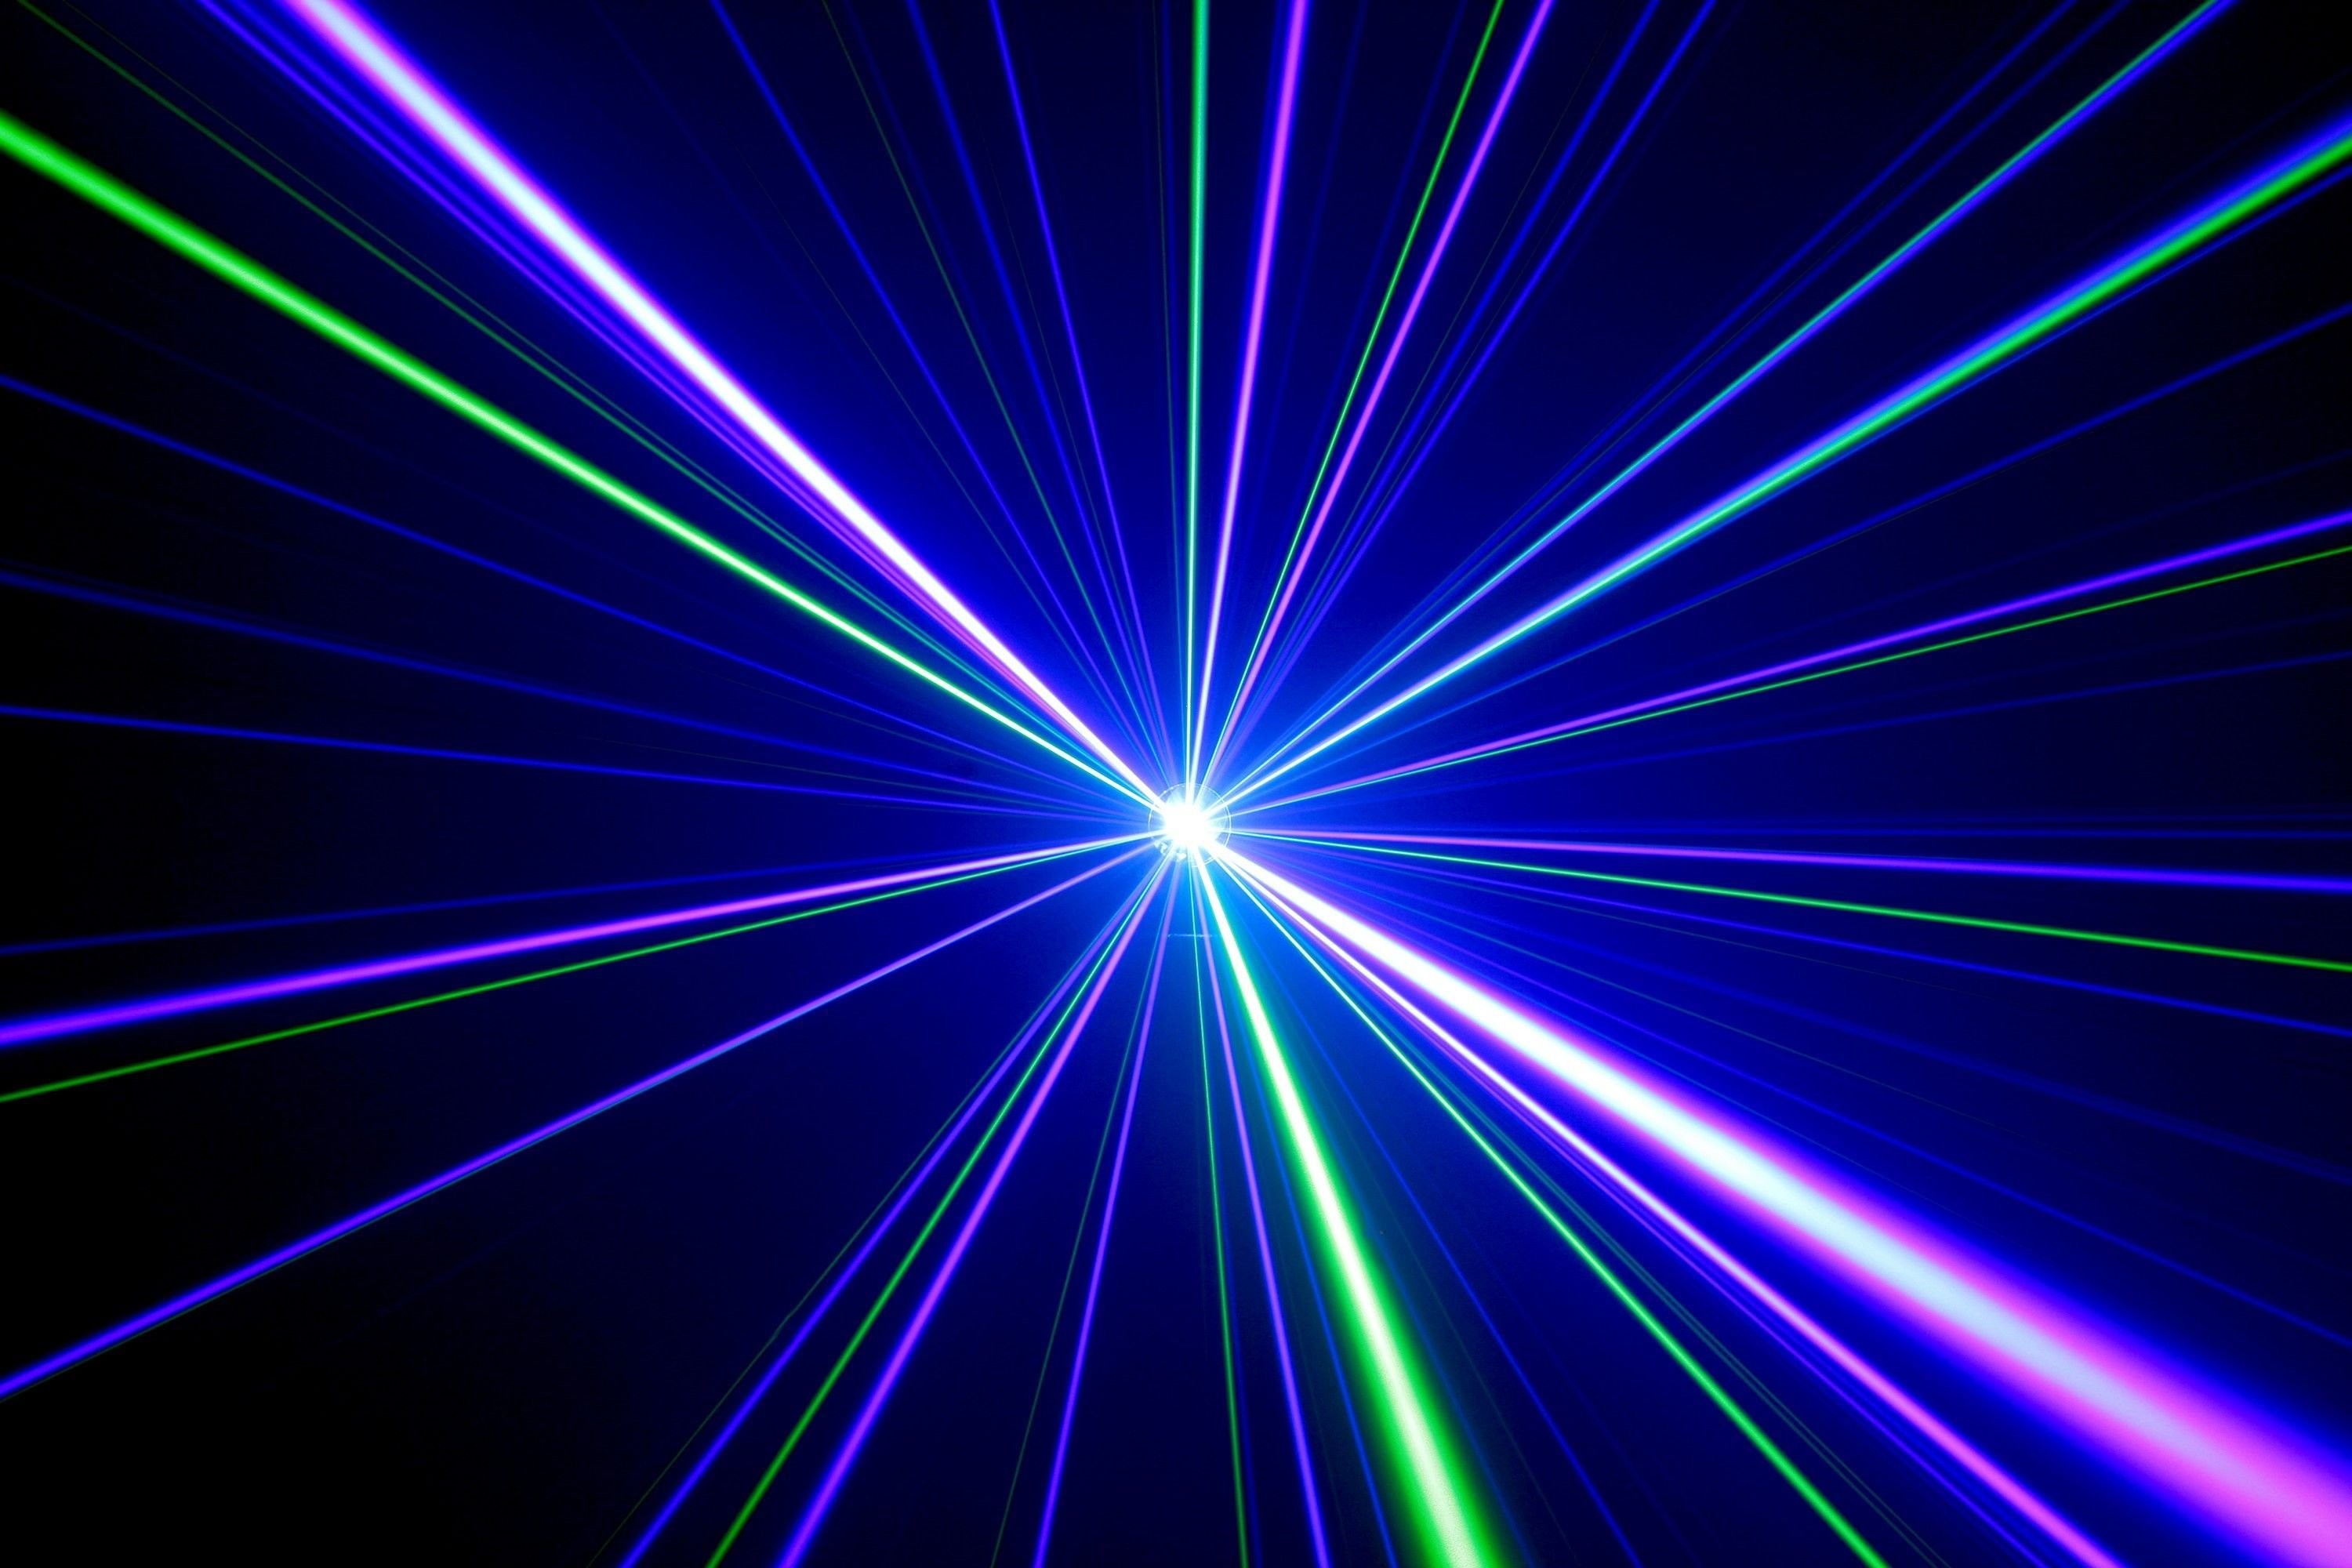 3000x2000 Laser Light Live Wallpaper Pro - Android Apps on Google Play